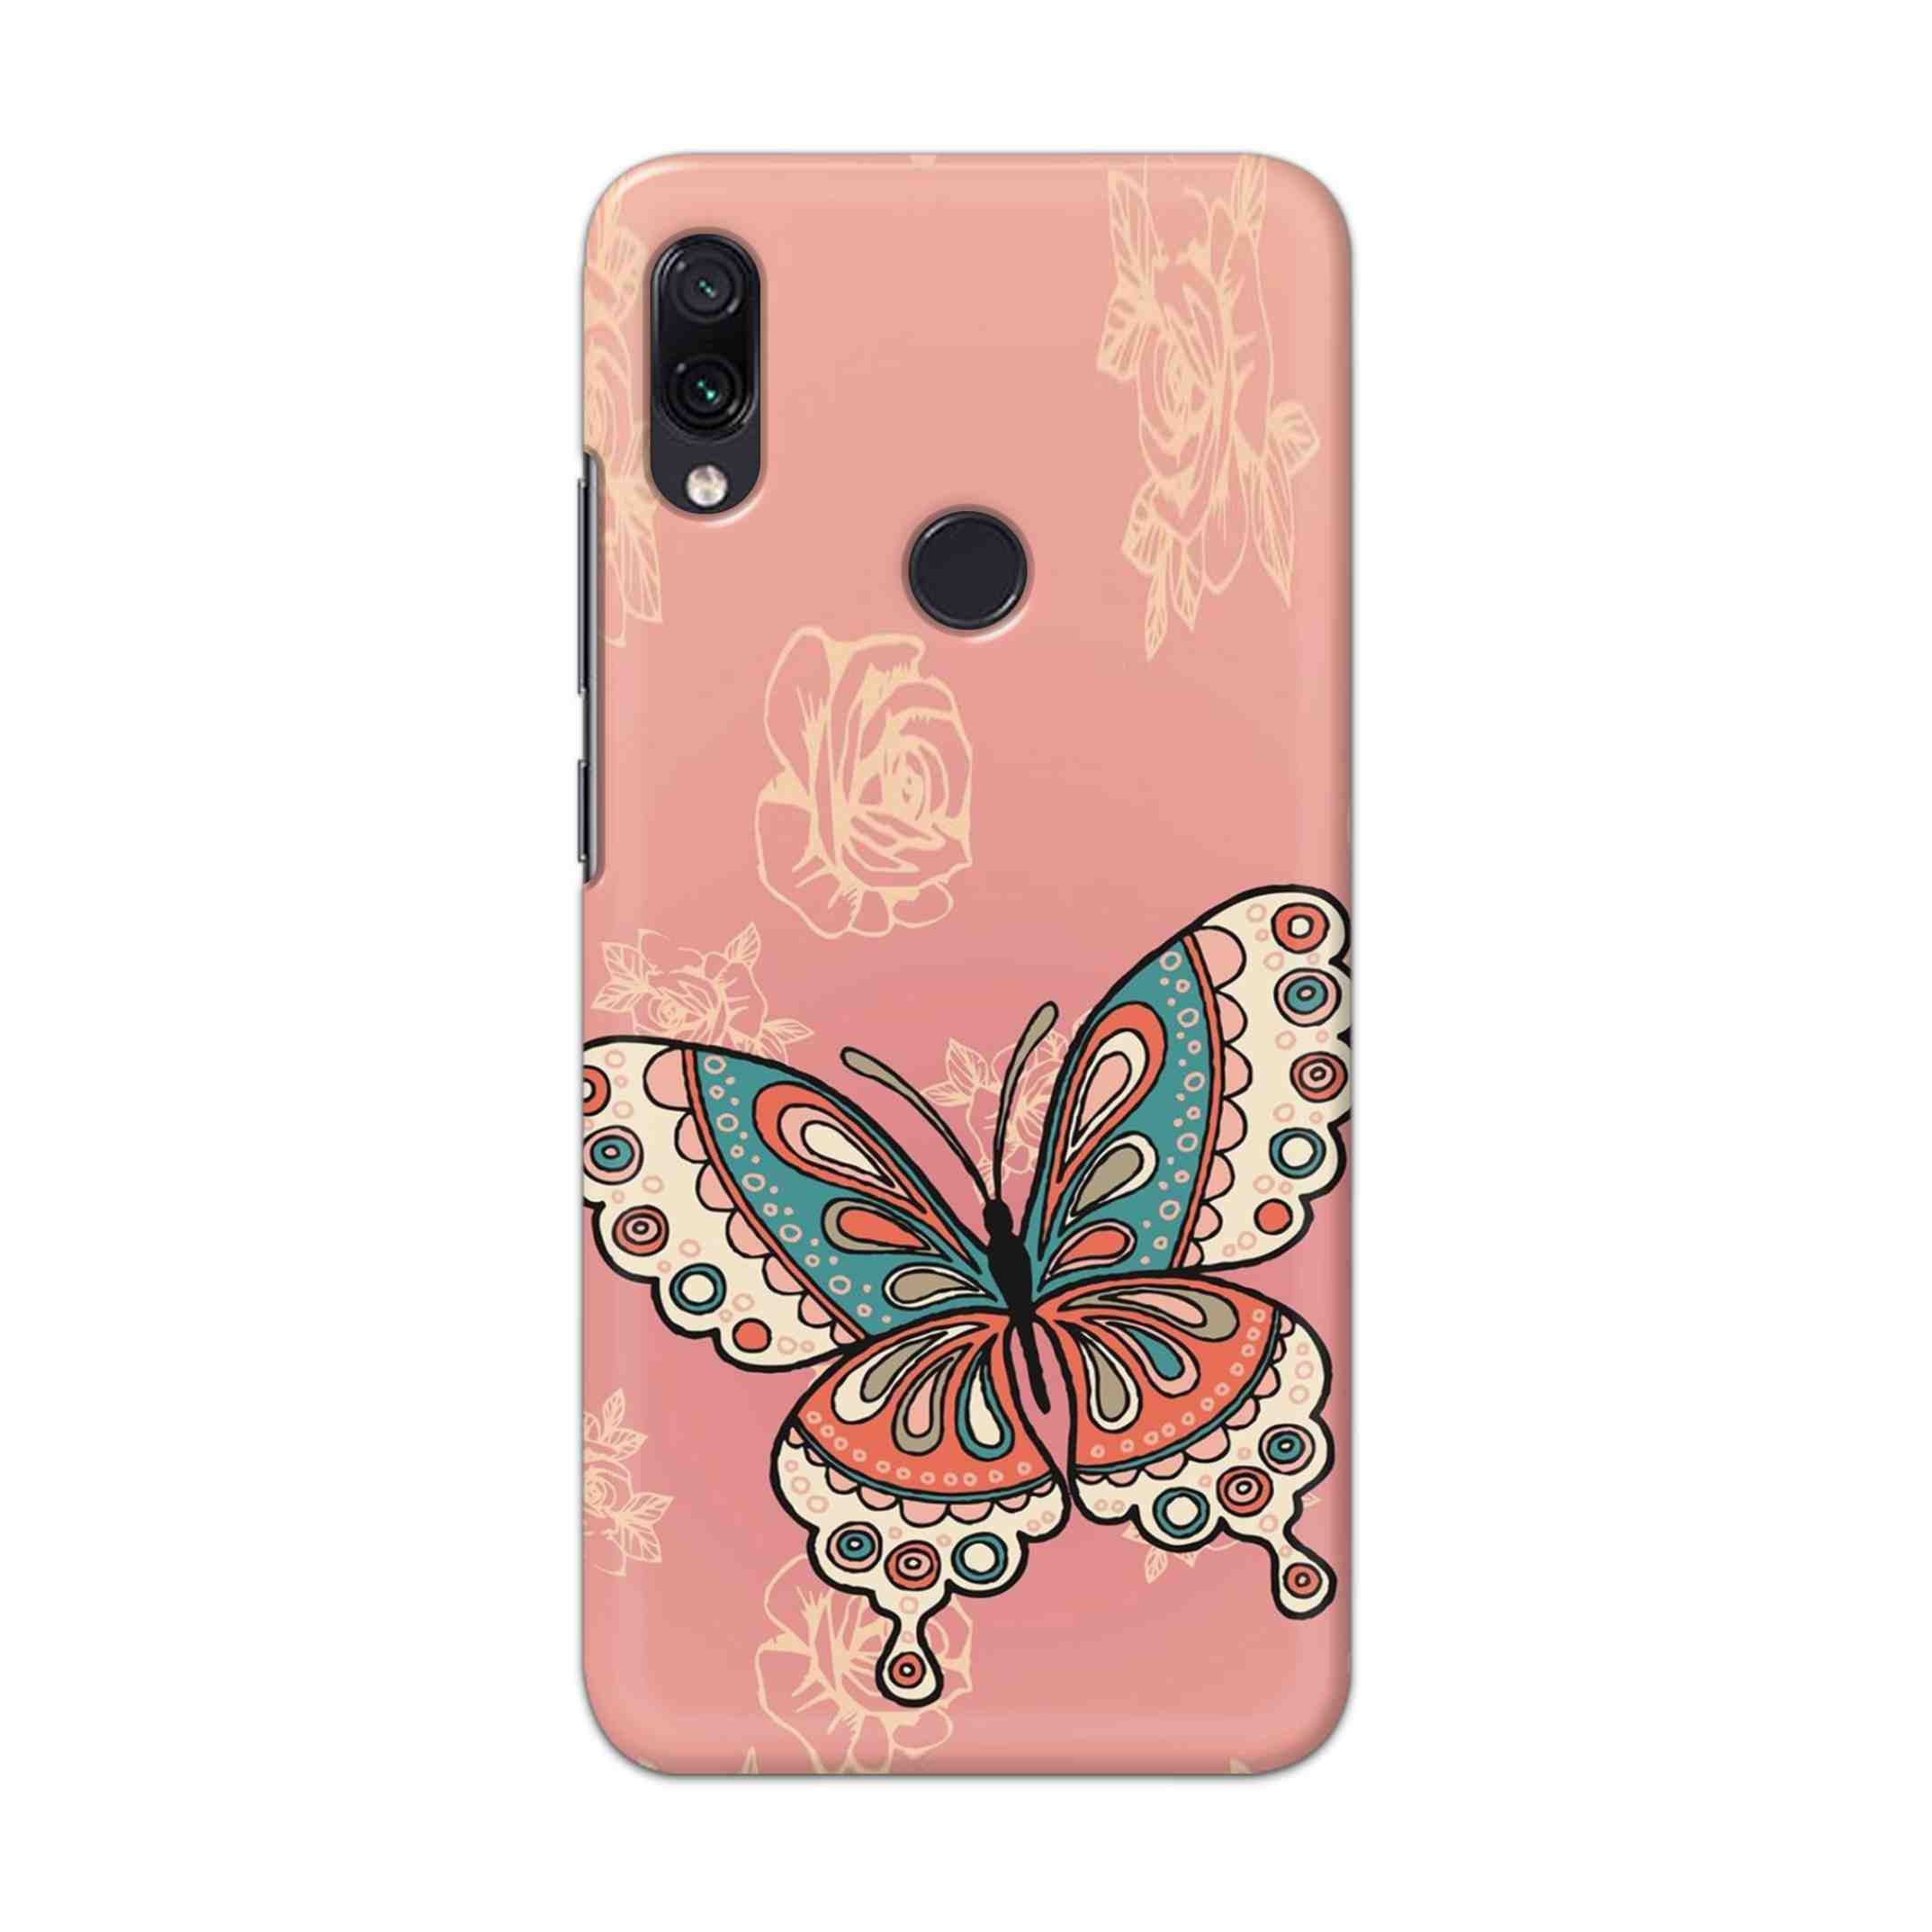 Buy Butterfly Hard Back Mobile Phone Case Cover For Xiaomi Redmi 7 Online